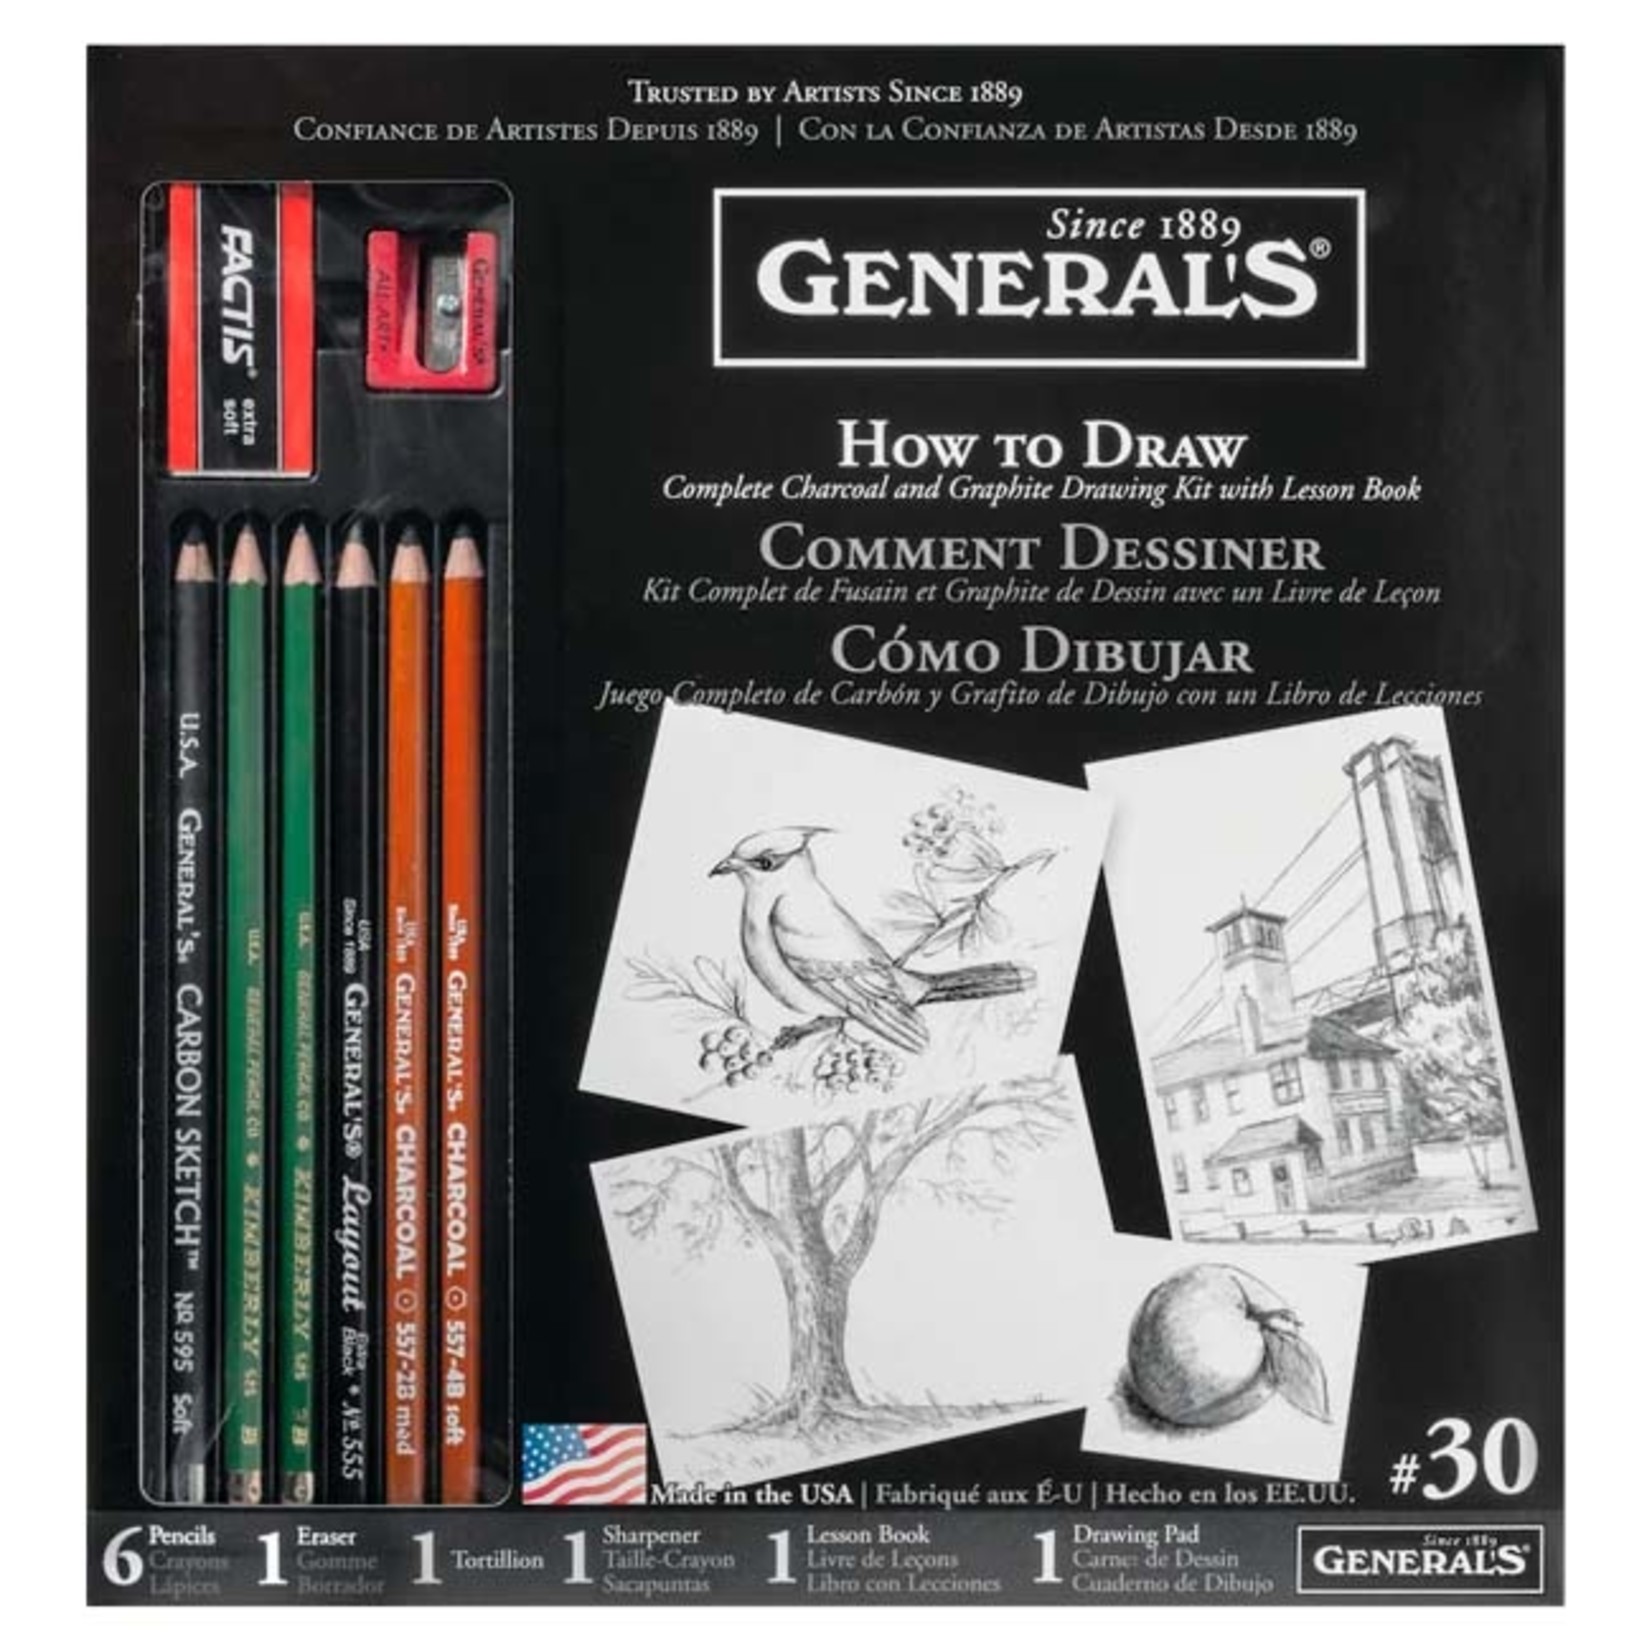 GENERAL'S HOW TO DRAW CHARCOAL AND GRAPHITE KIT